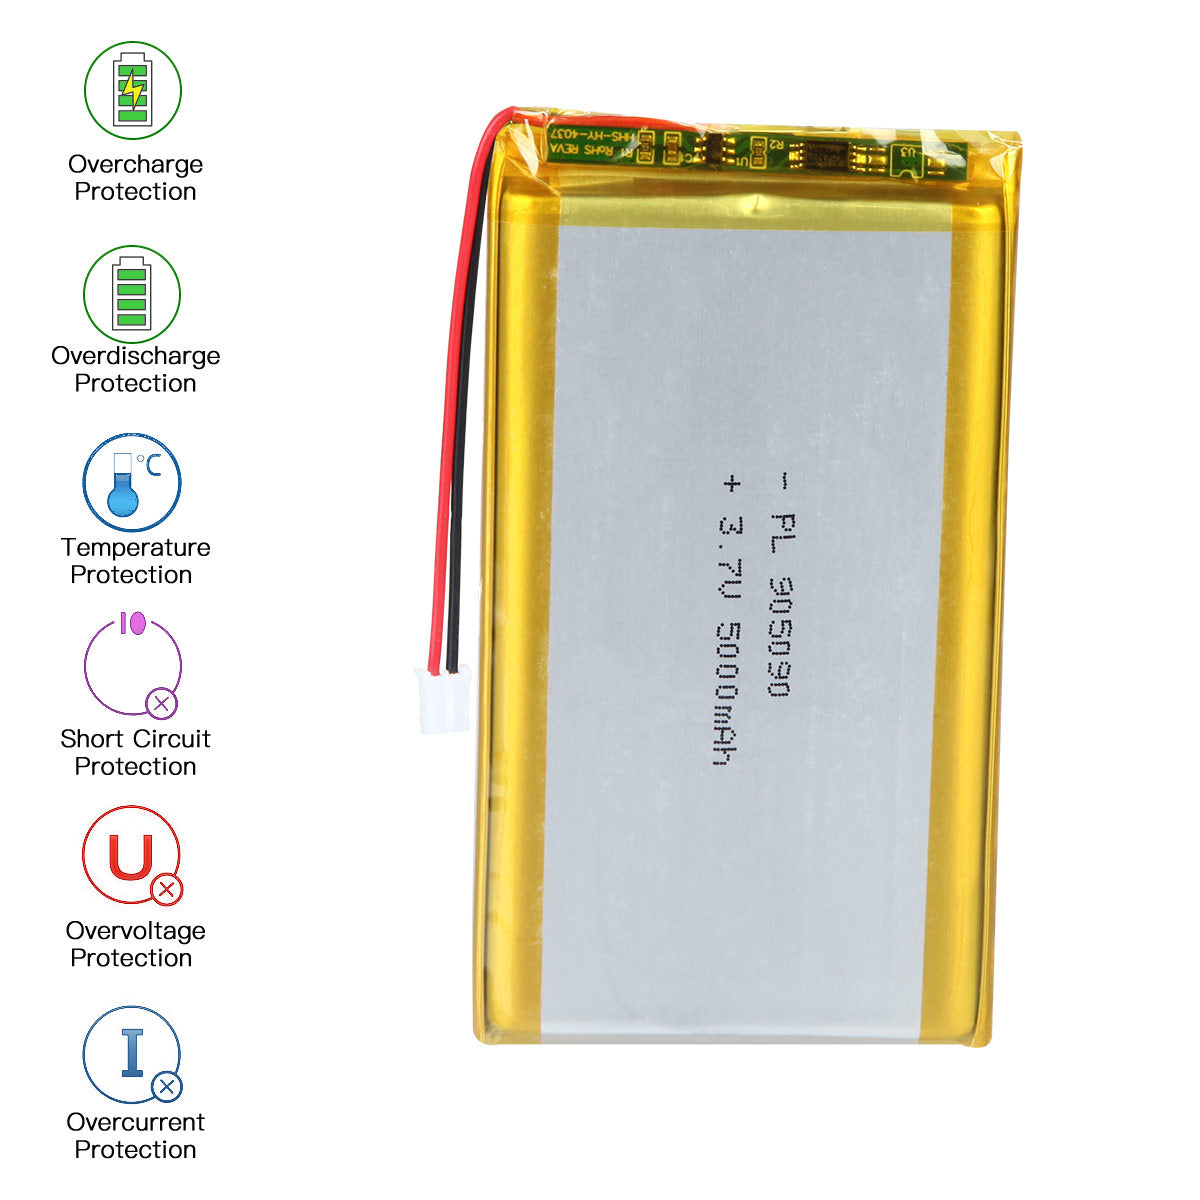 YDL 3.7V 5000mAh 905090 Rechargeable Lithium Polymer Battery